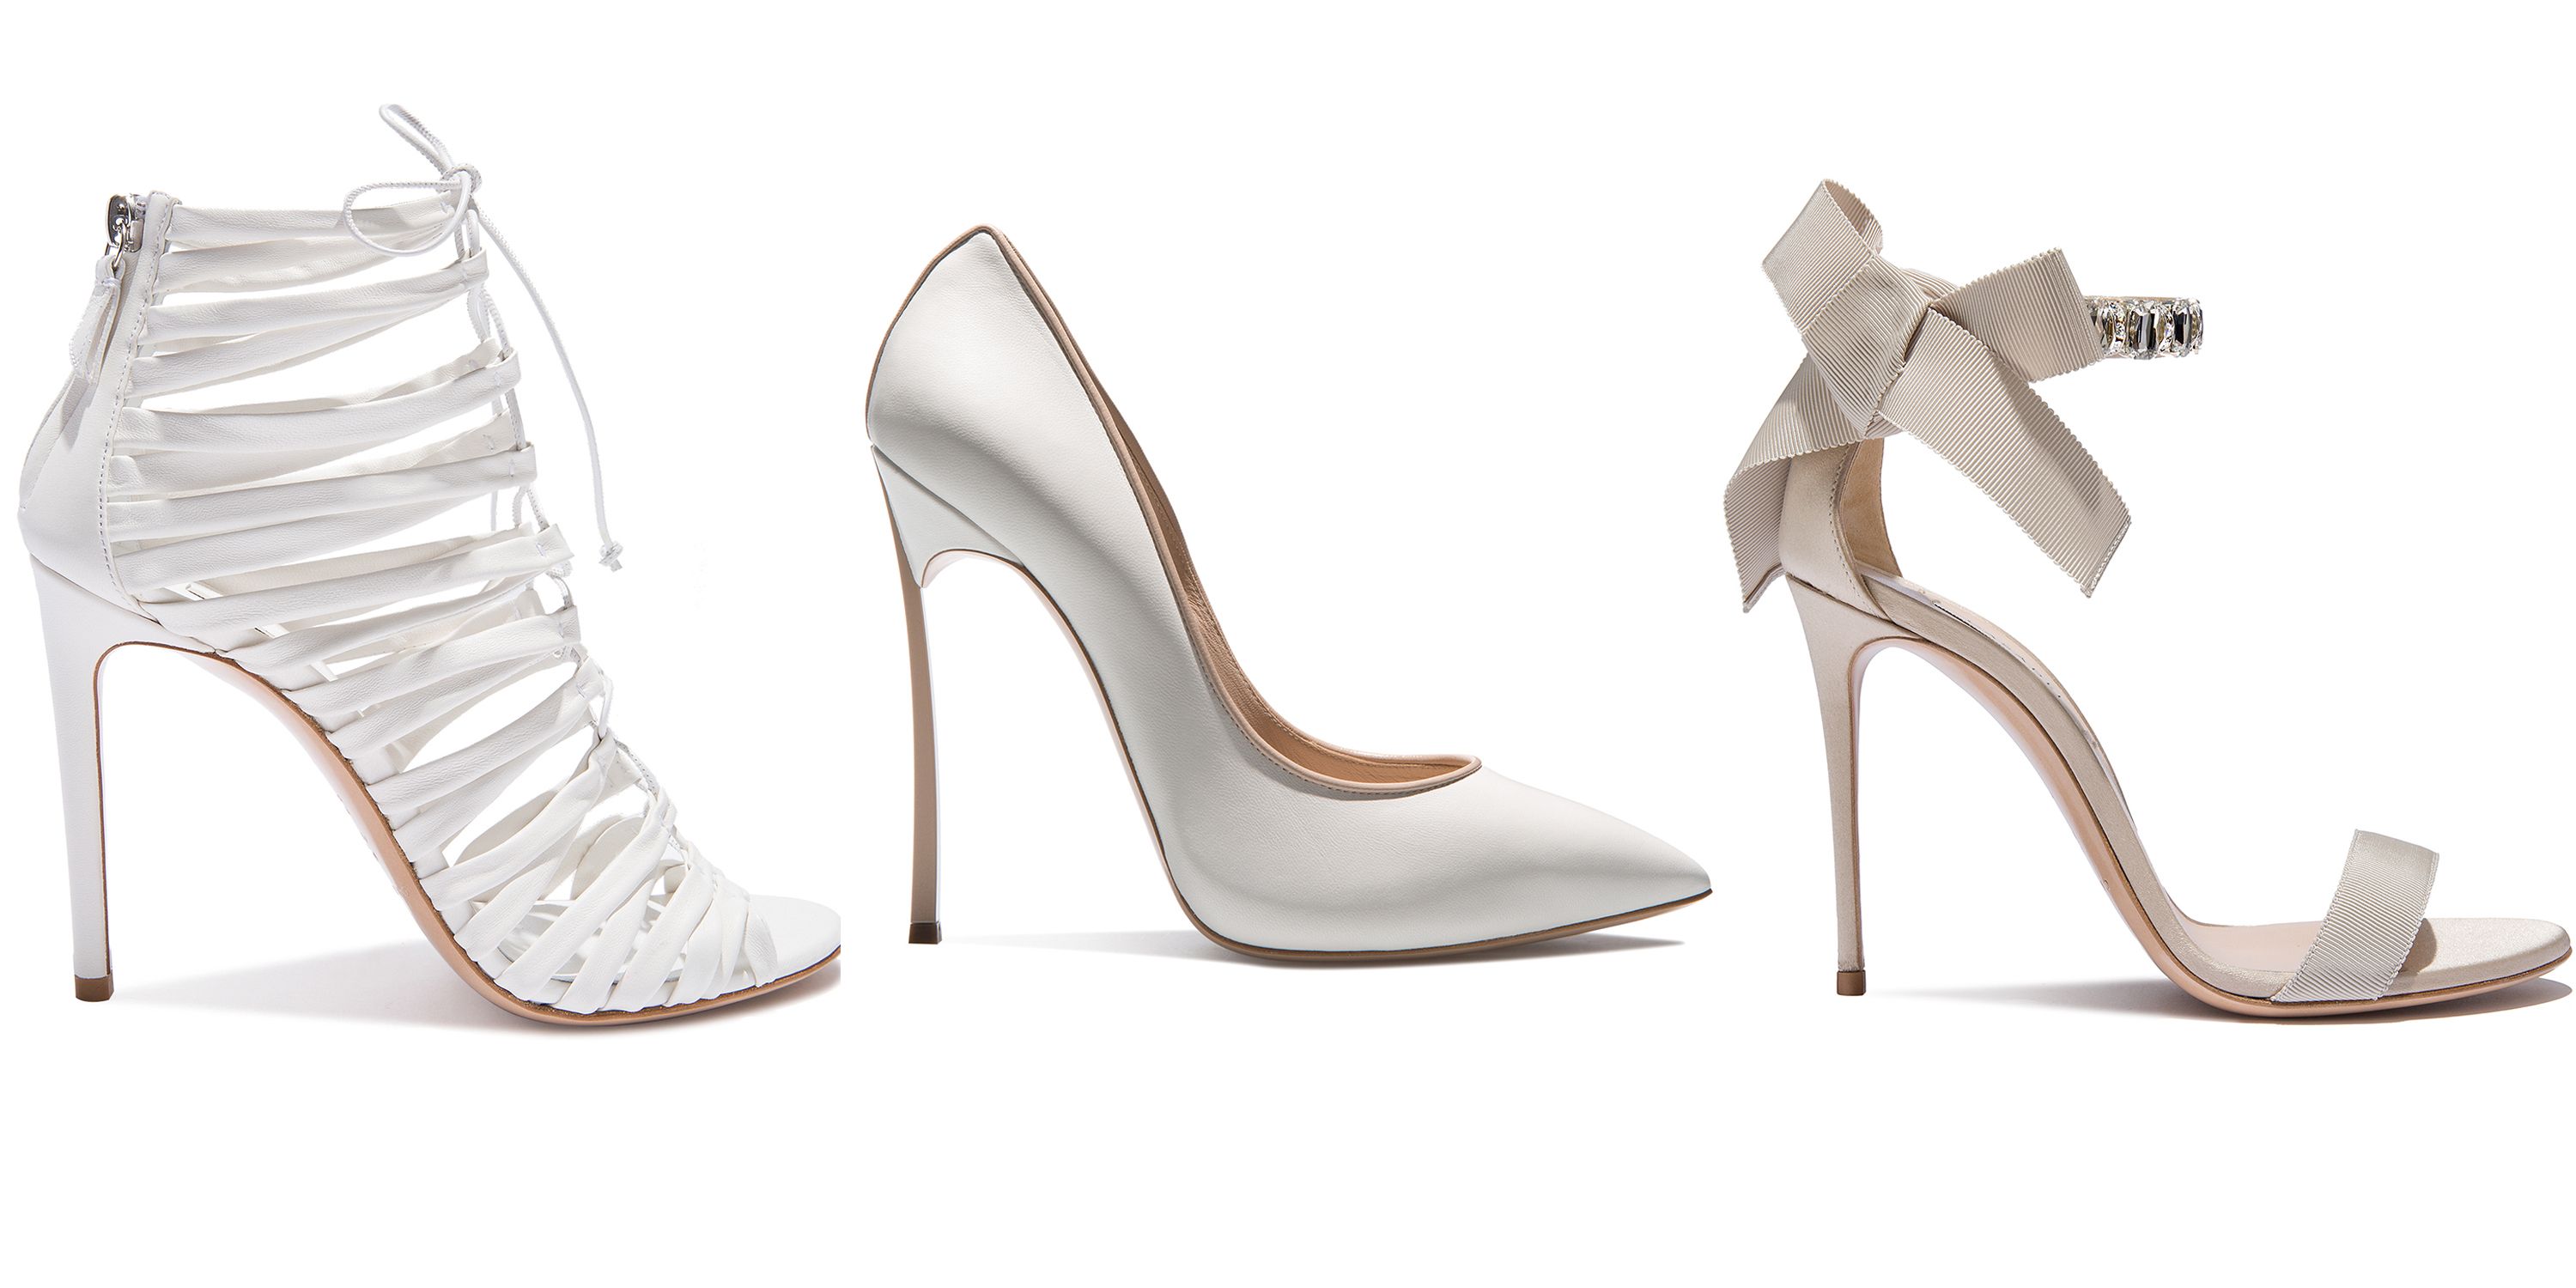 Aniquilar Automáticamente Deambular See Every Style from Casadei's New Bridal Capsule Collection - Casadei  Launches A Bridal Collection Available for Purchase Online